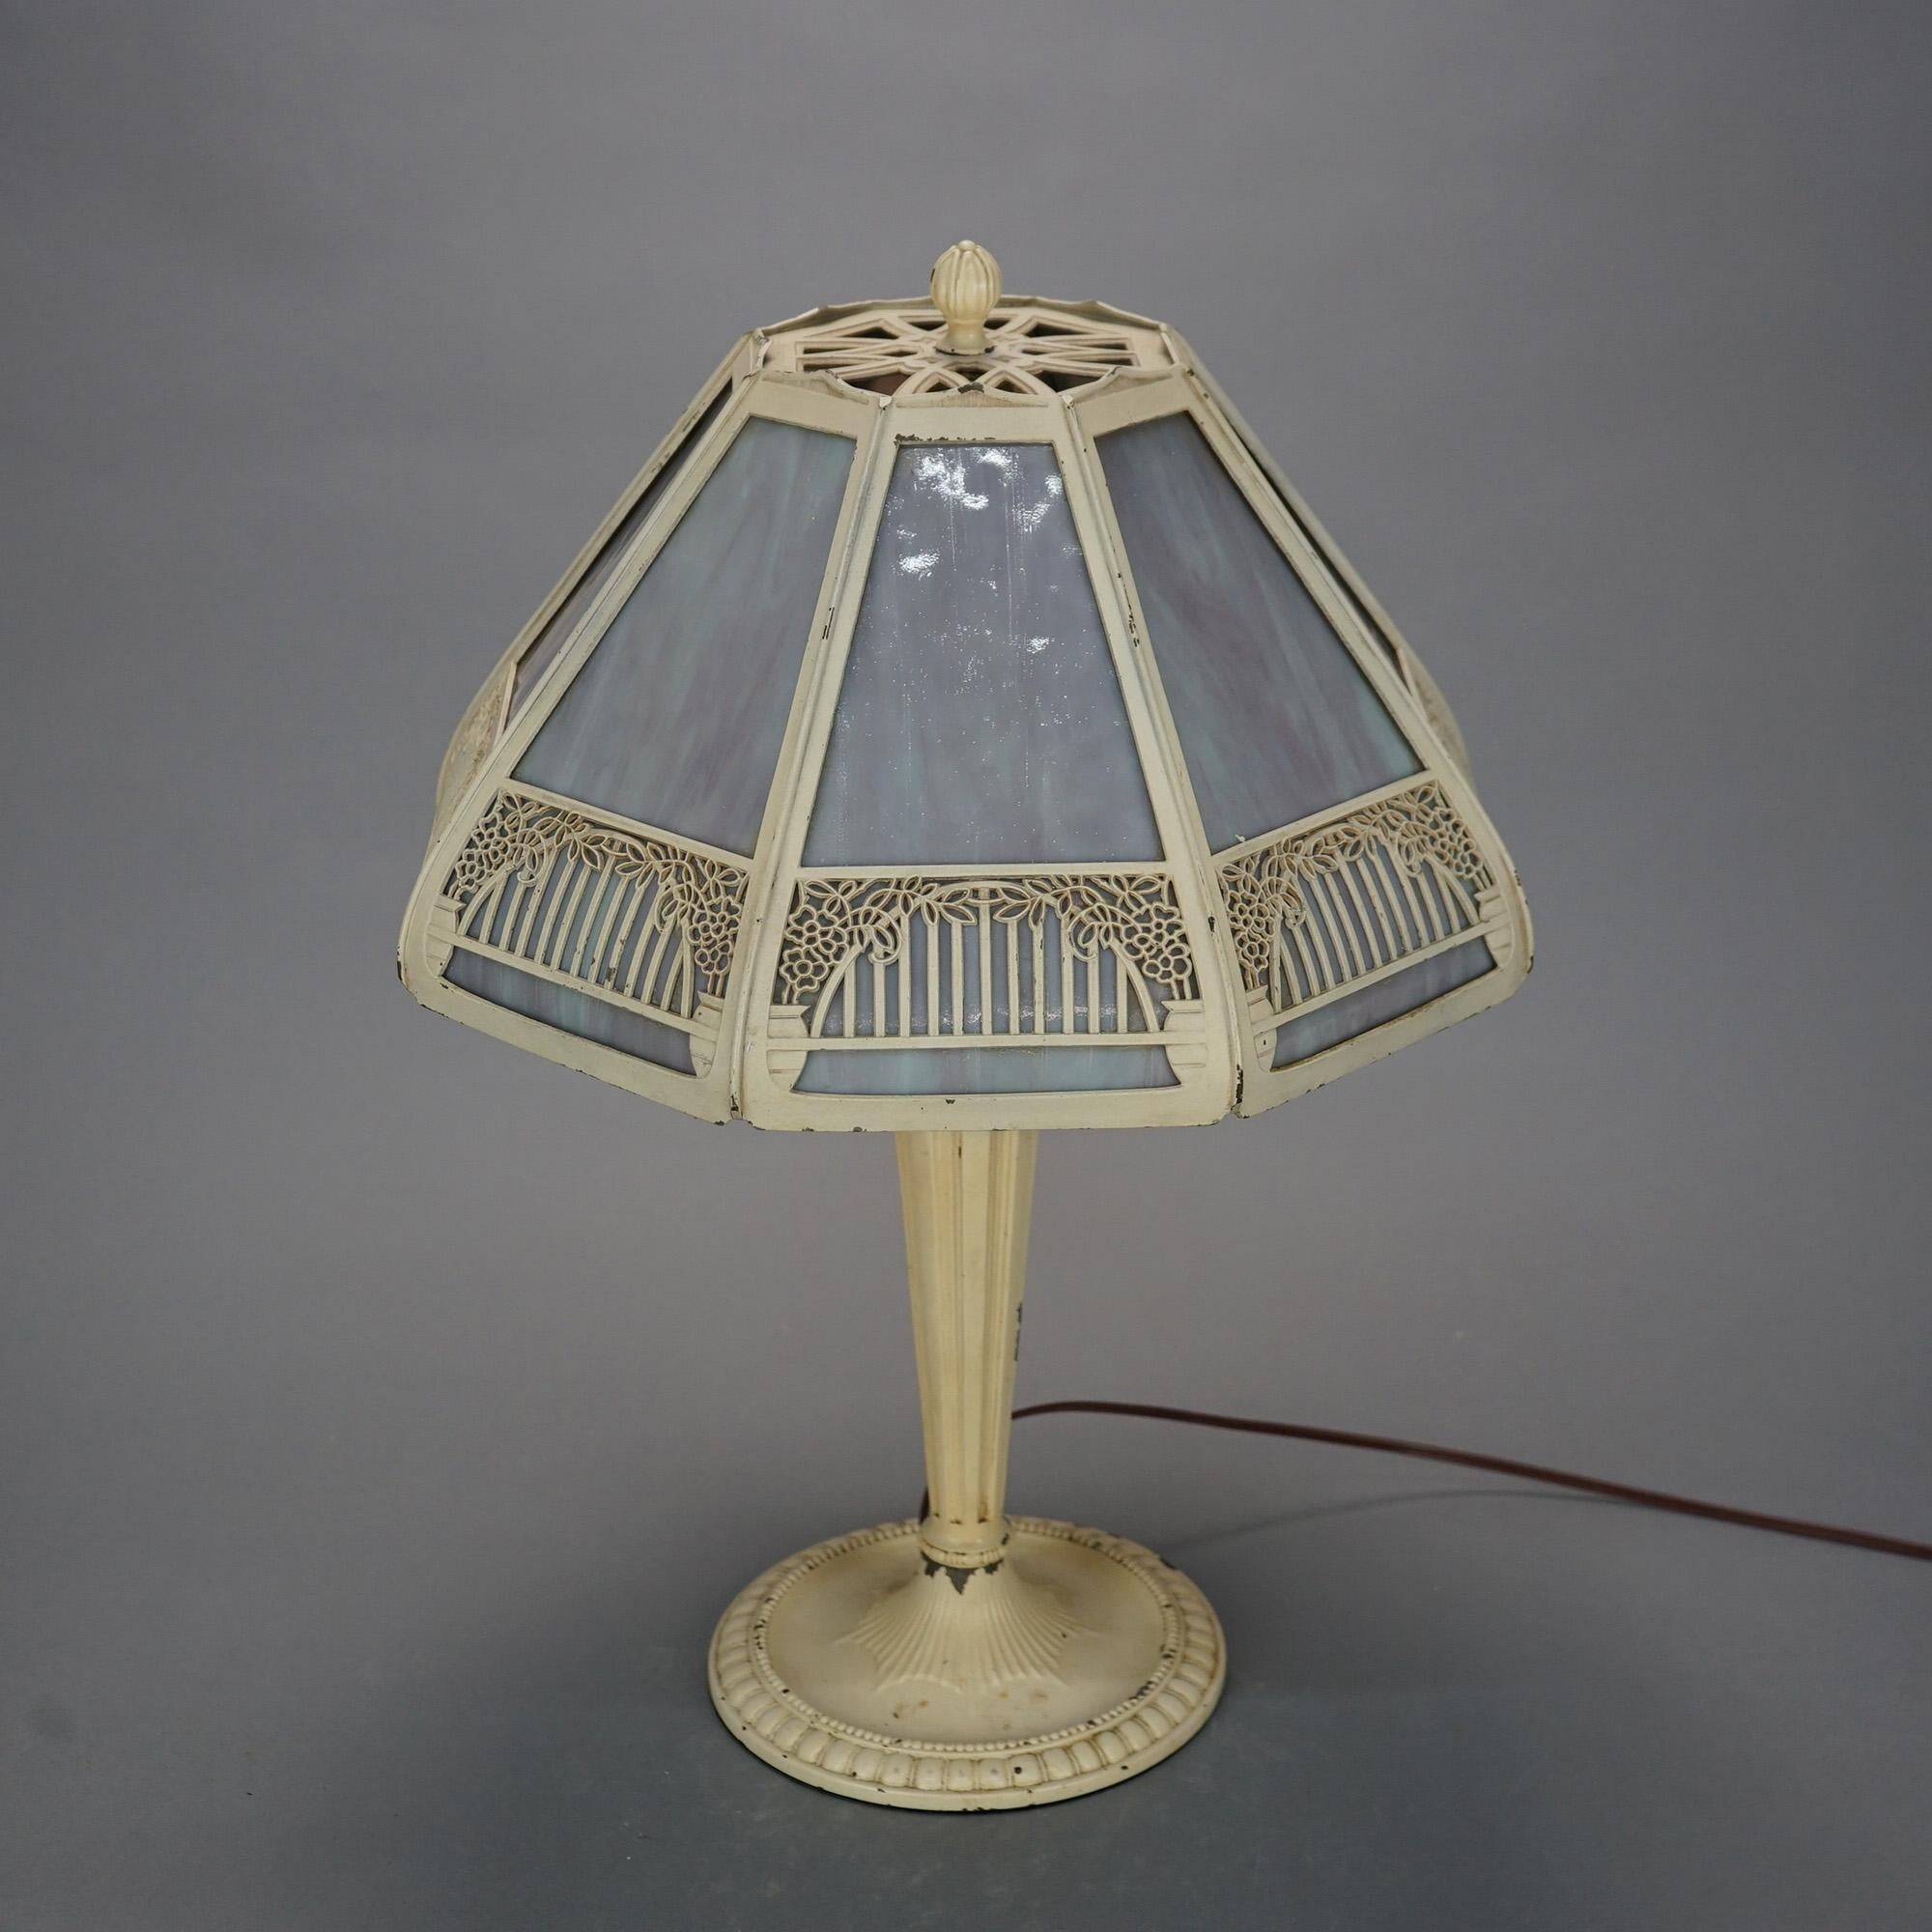 Arts and Crafts Antique Arts & Crafts Slag Glass Table Lamp with Filigree Panel Shade, C 1920